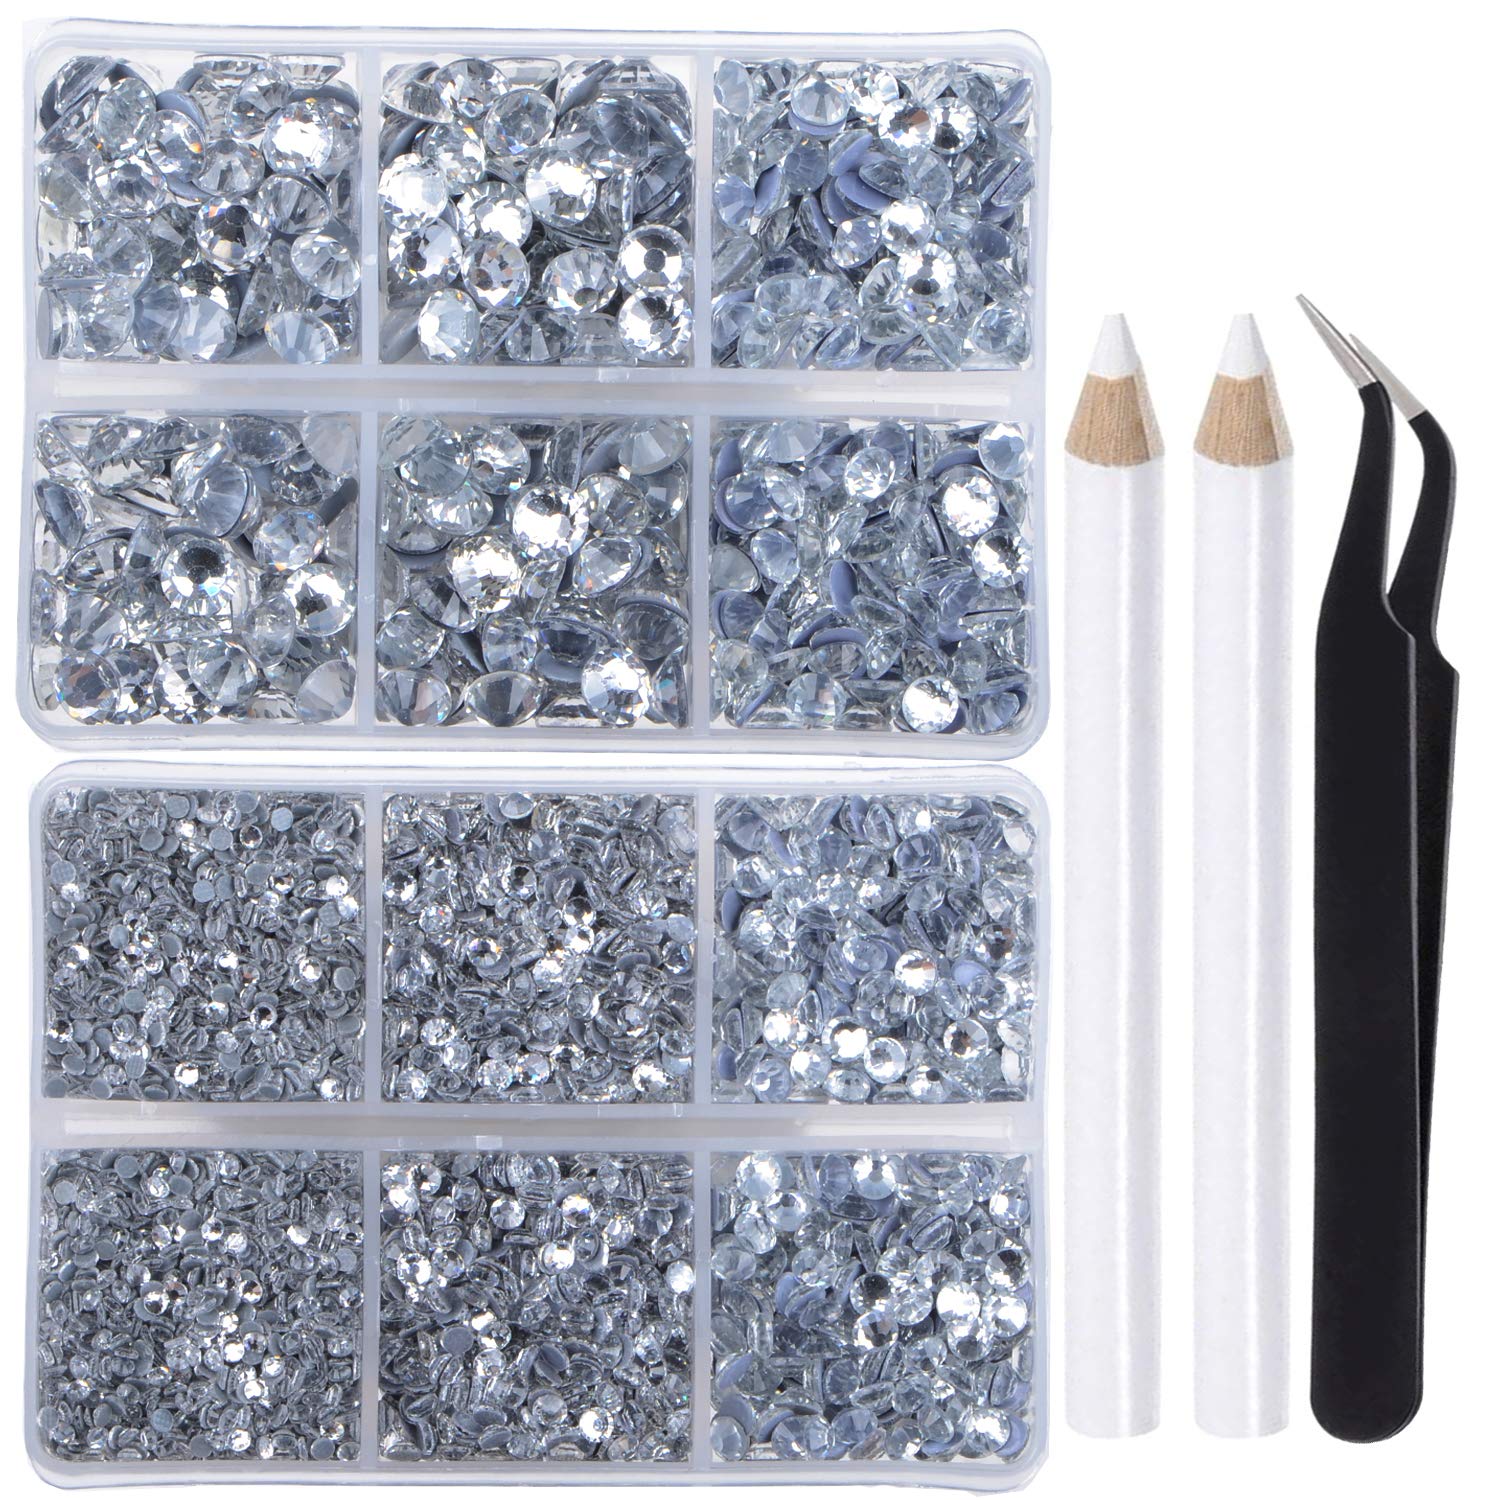 LPBeads 6400 Pieces Hotfix Rhinestones Clear Flat Back 5 Mixed Sizes  Crystal Round Glass Gems with Tweezers and Picking Rhinestones Pen Mix  SS6-SS30 Clear